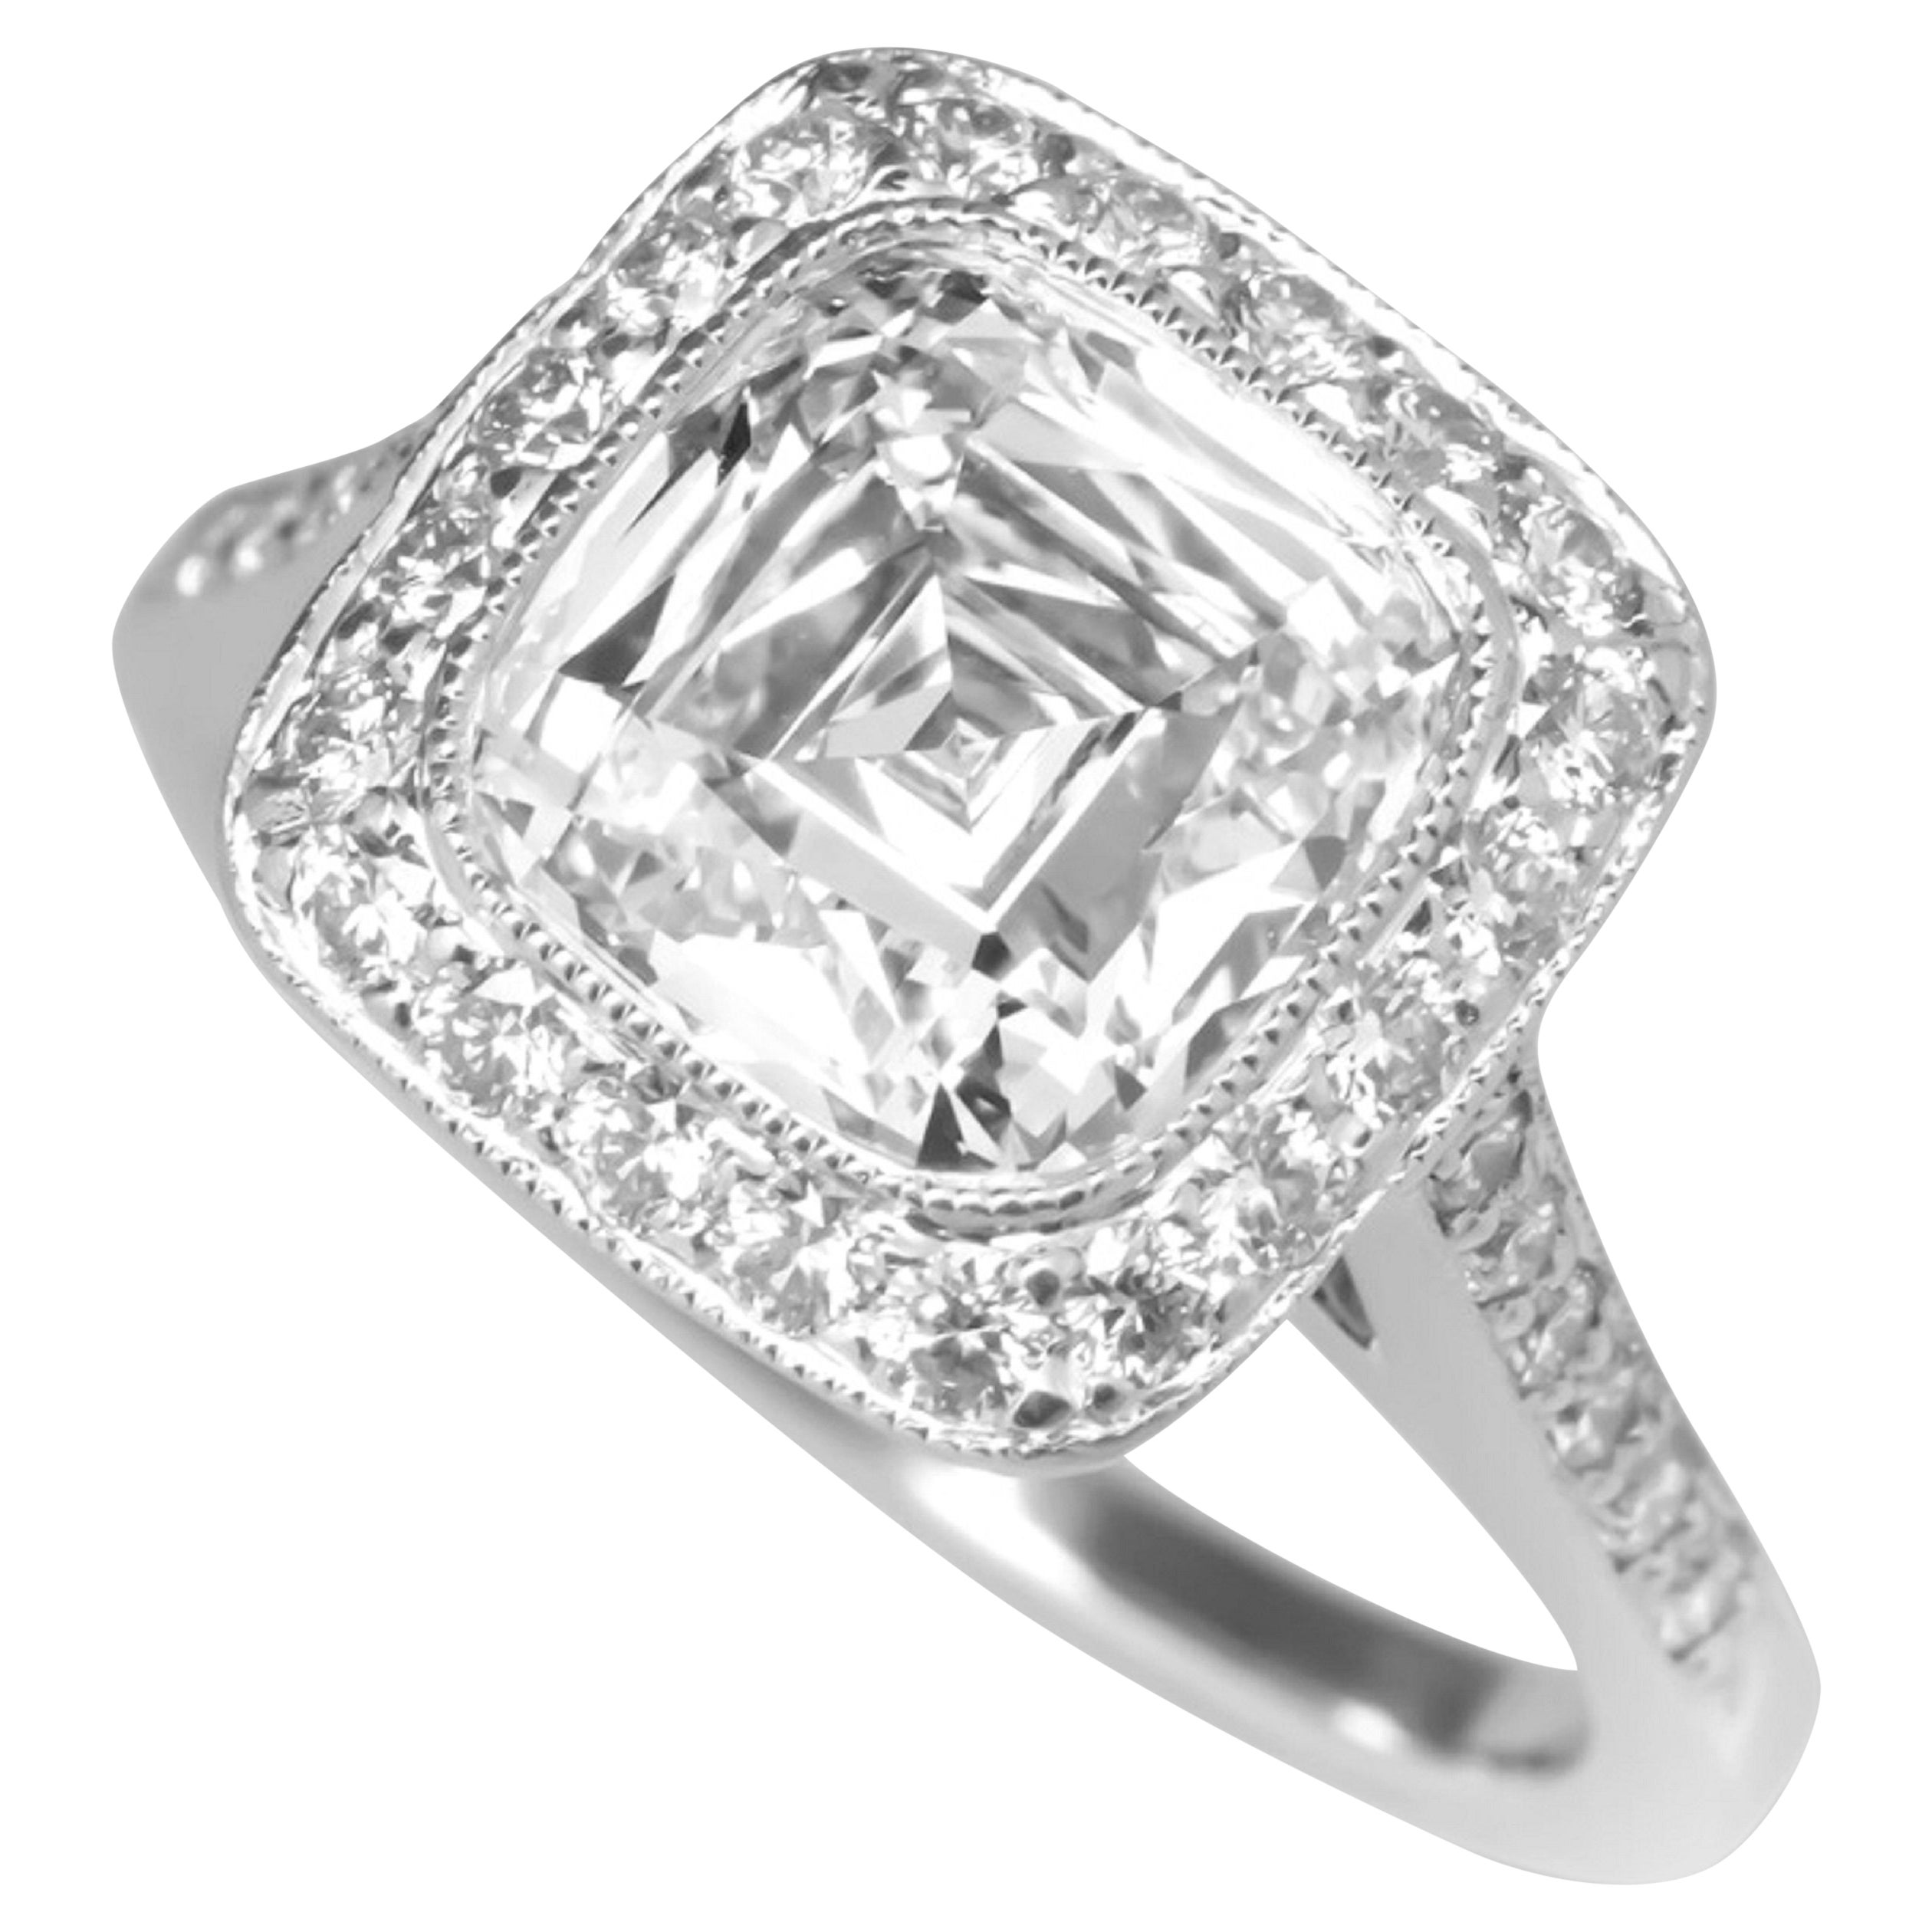  Legacy Cushion Brilliant Cut Diamond Engagement Ring.

The ring weighs 6.8 grams, size 6.25, the center stone is a Legacy Cushion Brilliant Cut diamond weighing 2.65 ct, H in Color, VVS1 in Clarity, with None Fluorescence, Excellent cut, Very Good